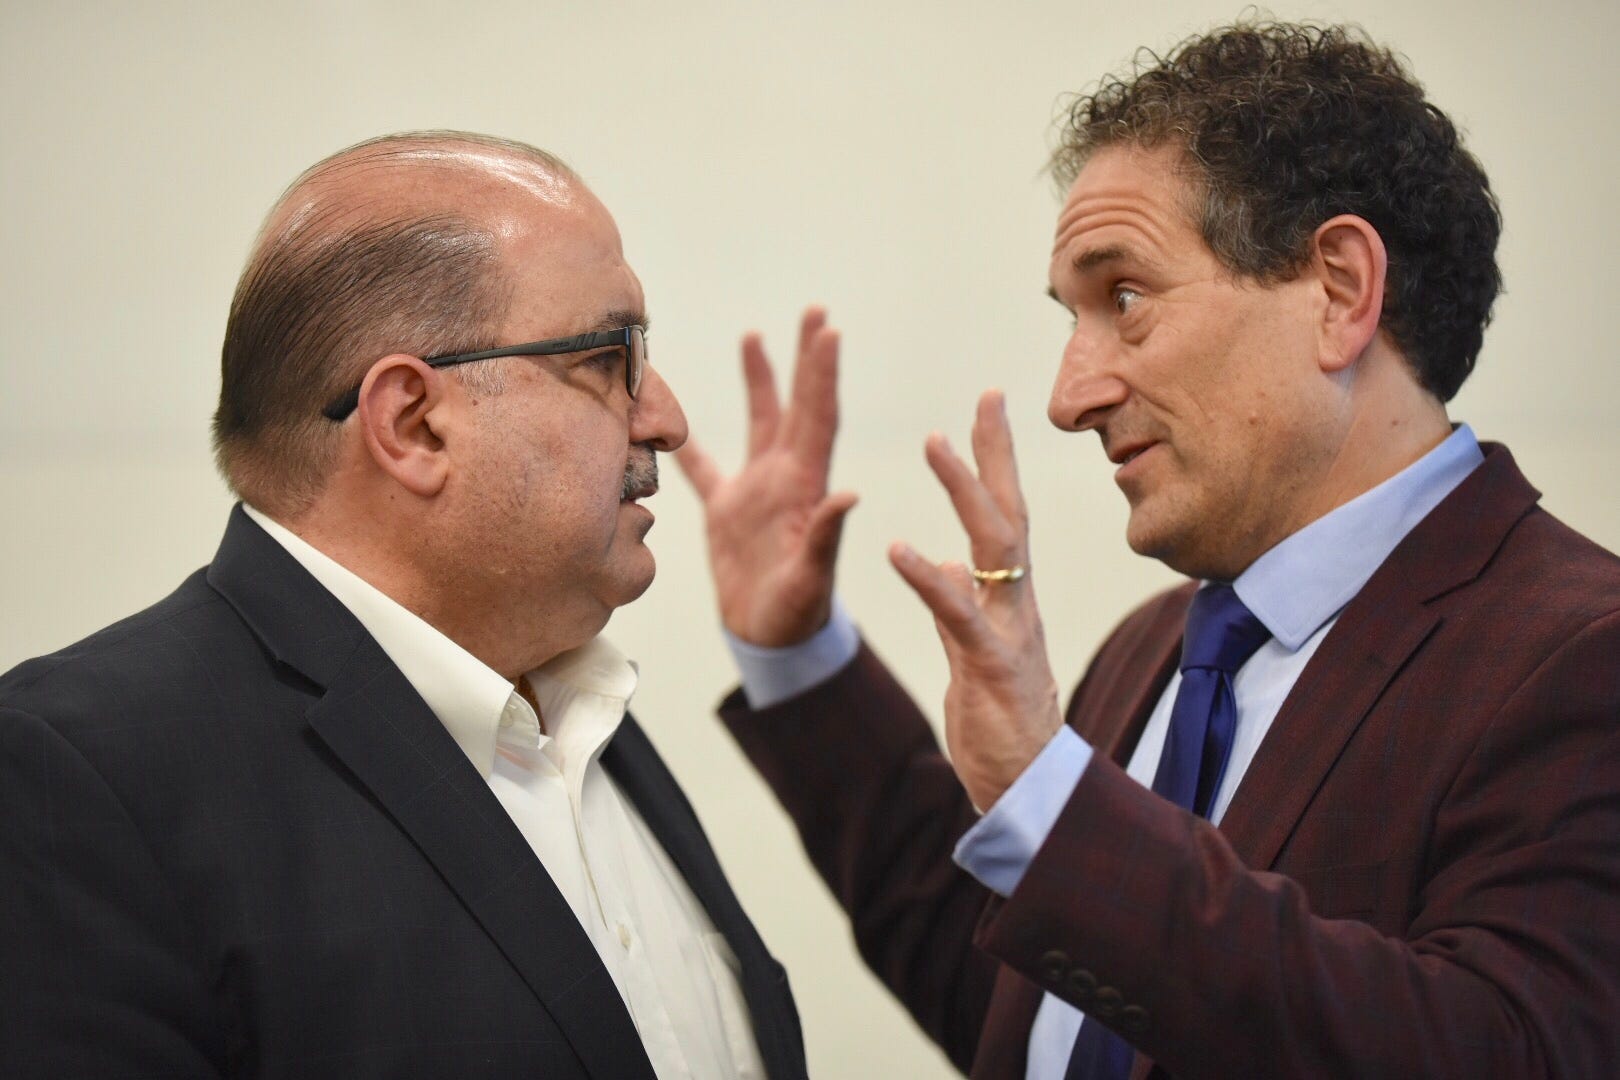 Rep. Andy Levin (right) speaks with Sam Hamana during a meeting concerning the Iraqi deportations at the Chaldean Community Center on Saturday, April 6, 2019.